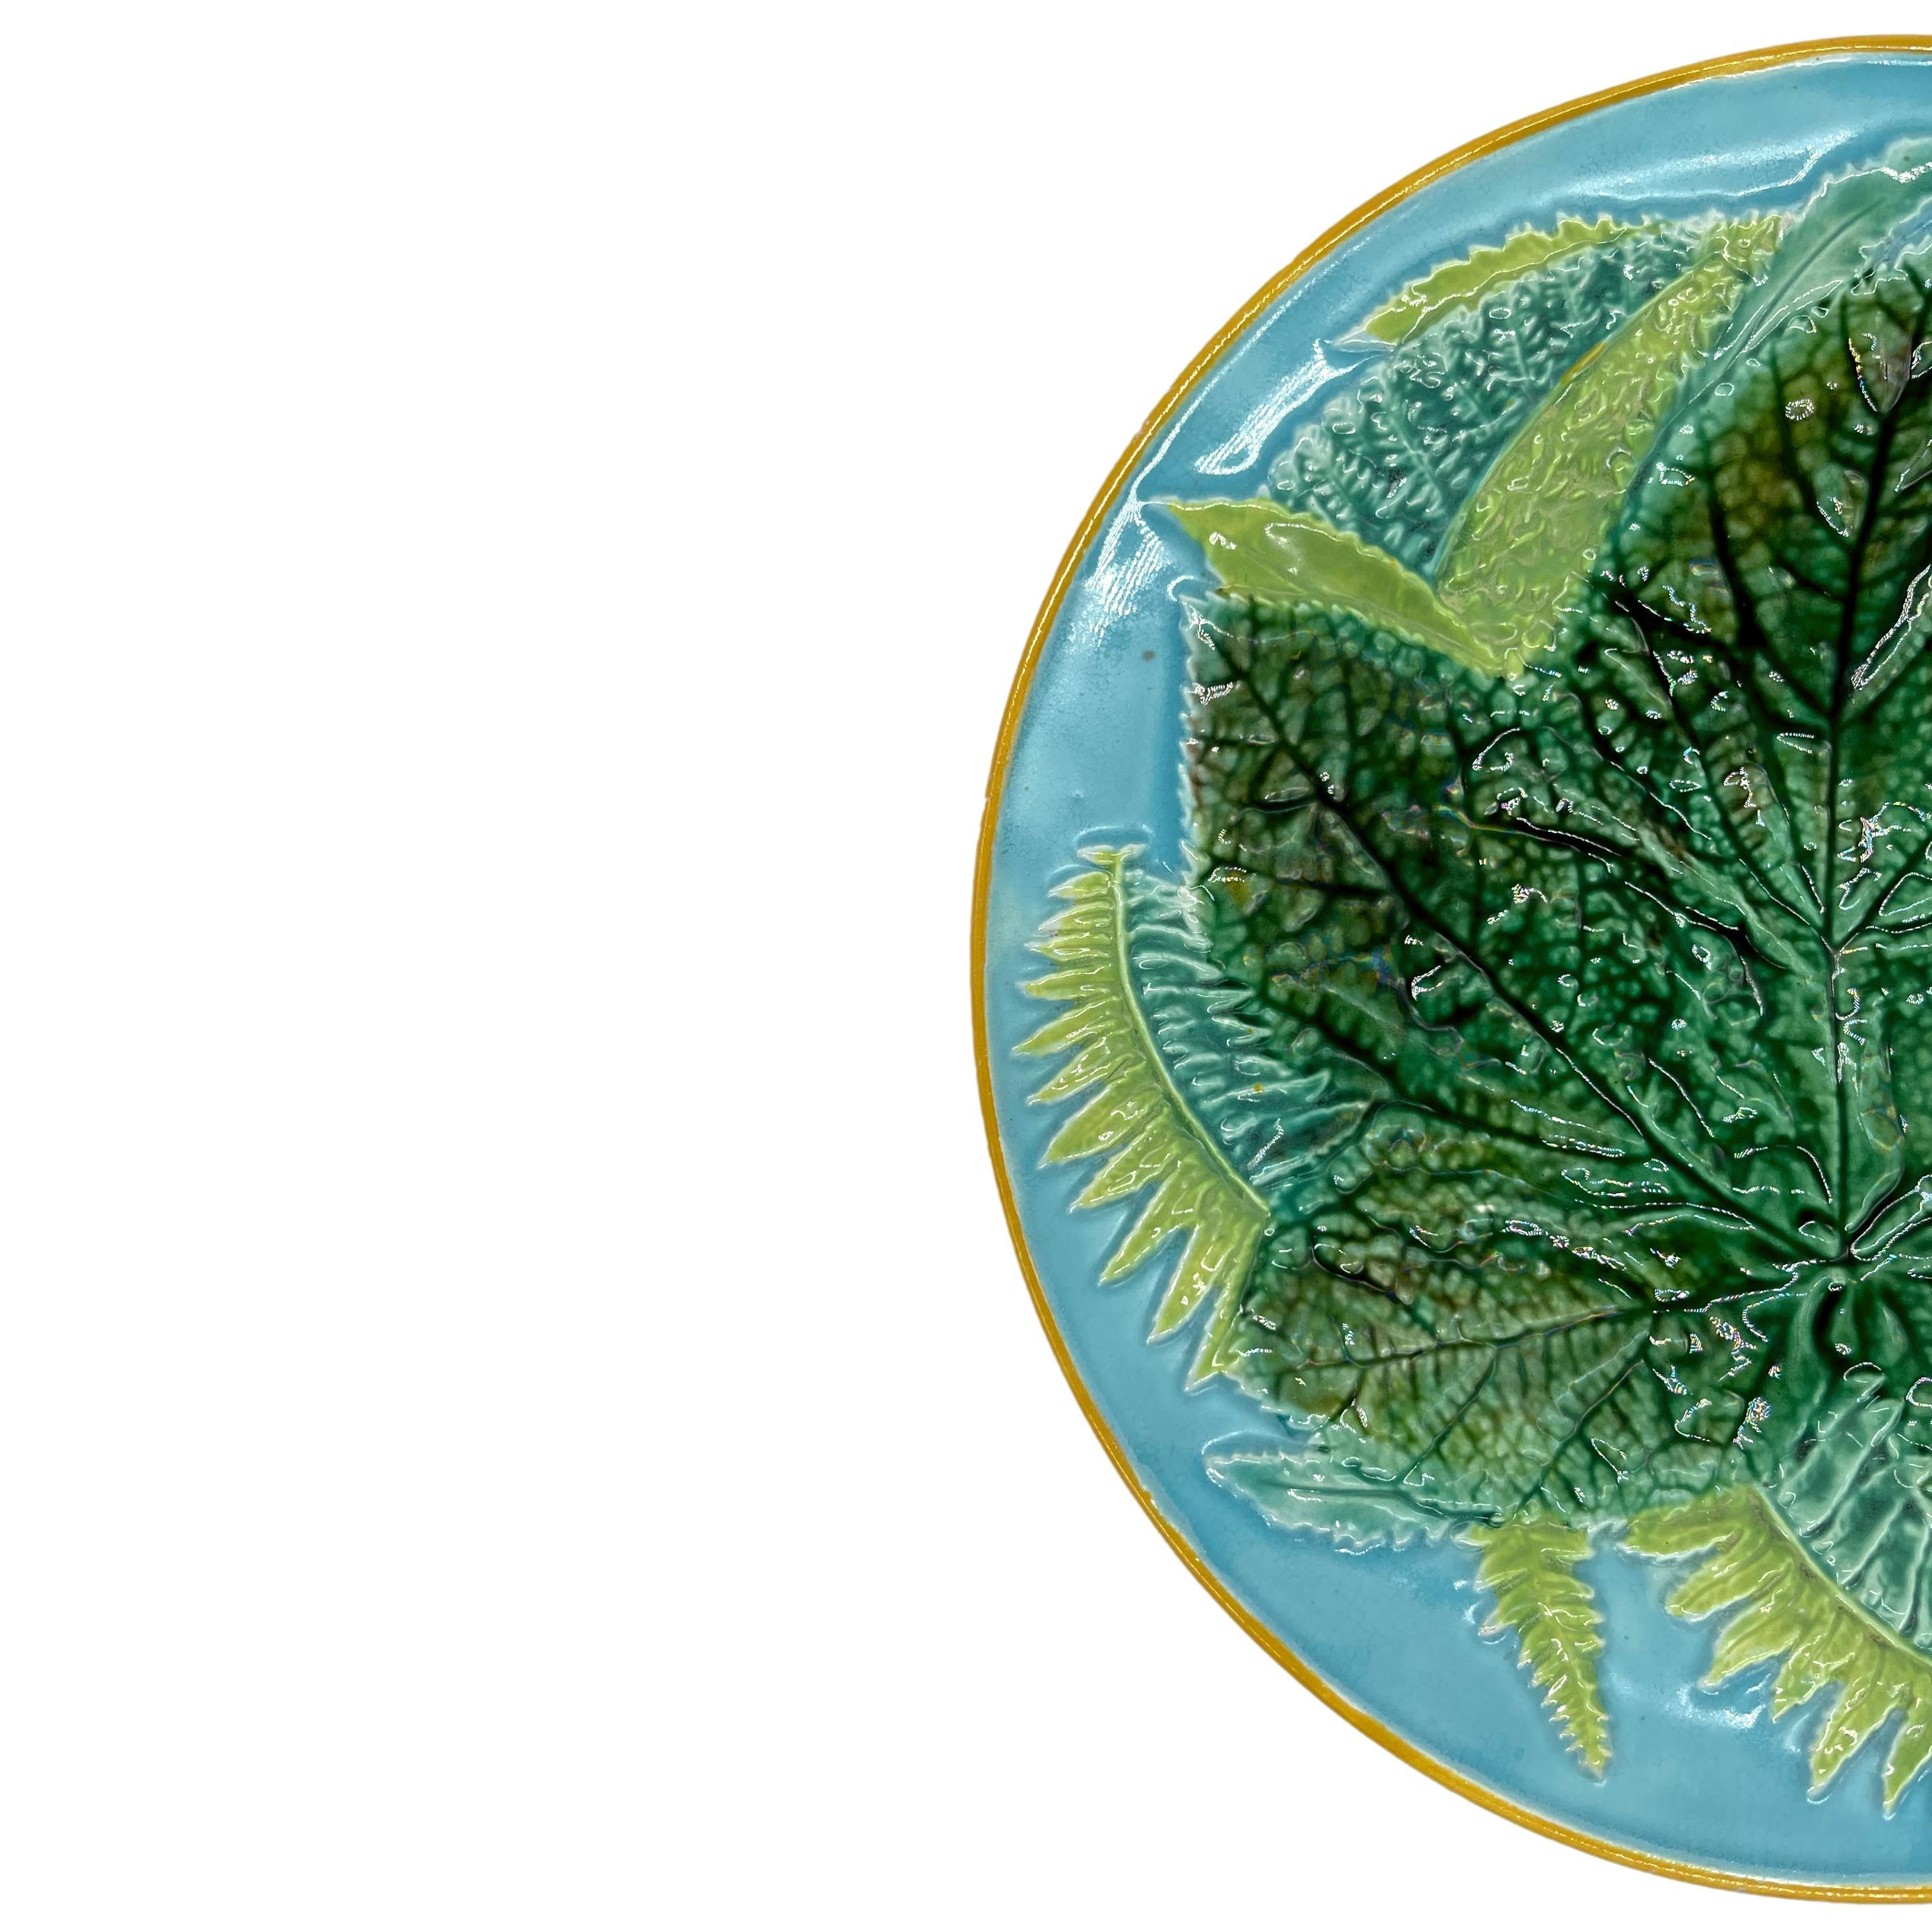 George Jones Majolica Maple Leaf and Ferns Plate, English, ca. 1870, the relief molded dish with a central green-glazed maple leaf with ferns on a turquoise ground, the rim banded in yellow ocher, the reverse glazed in green and brown tortoiseshell